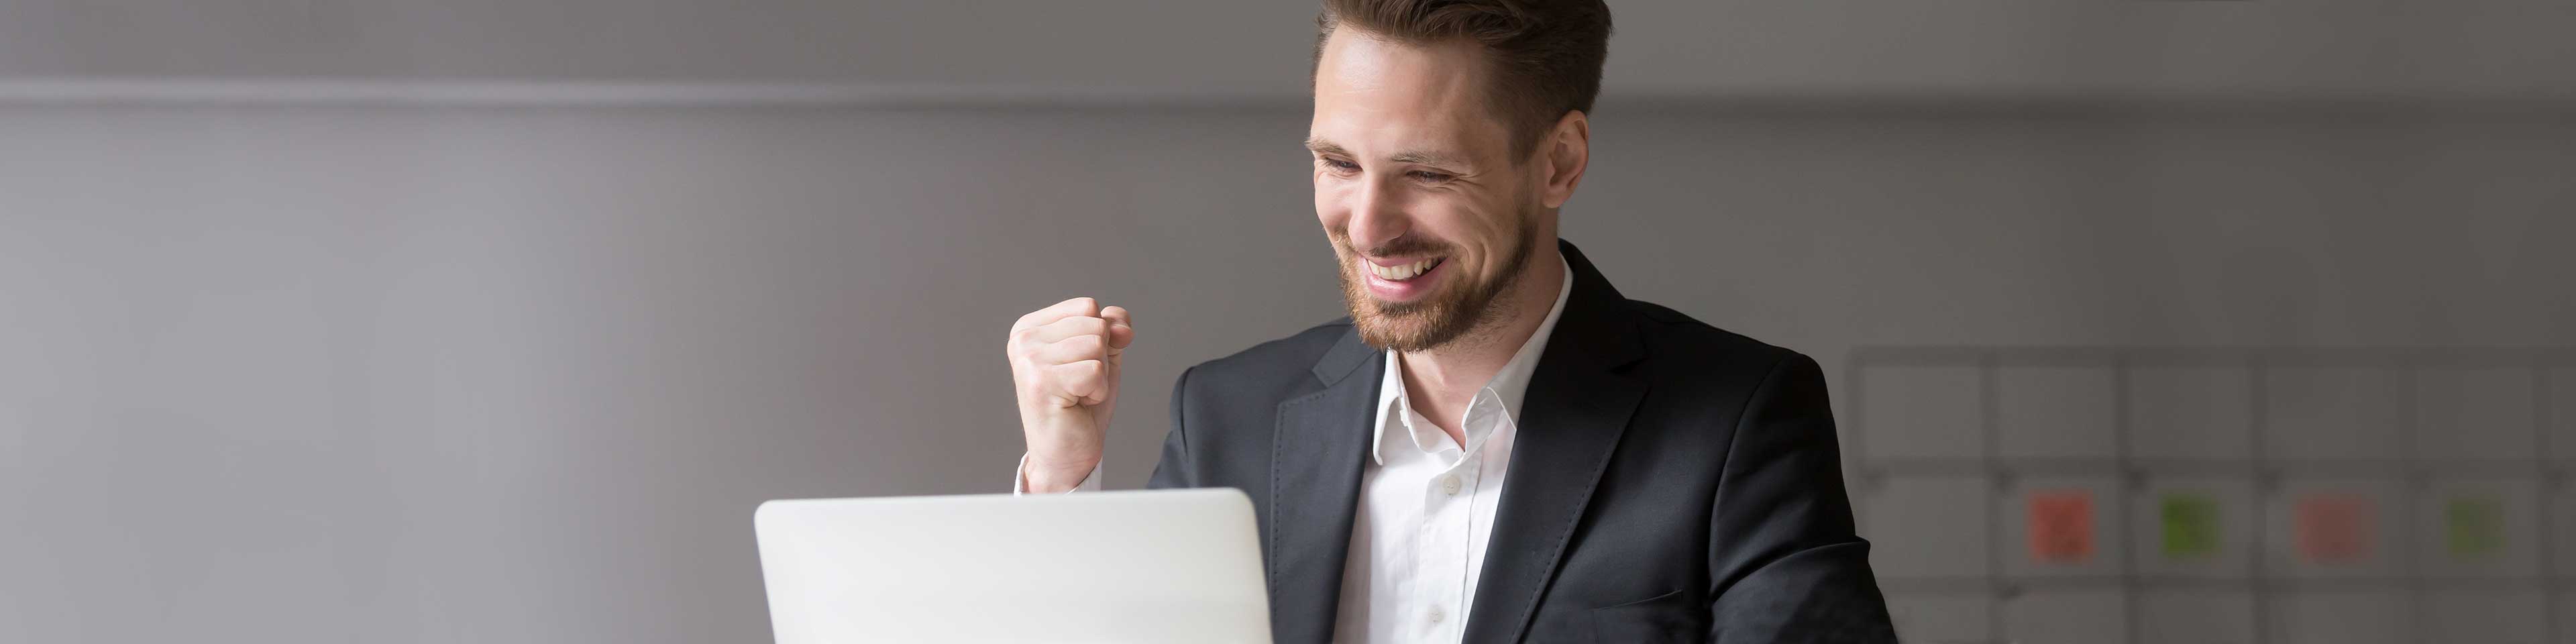 man wearing grey suit jacket and white button up shirt with unbuttoned collar smiling and shaking his fist in excitement facing a laptop